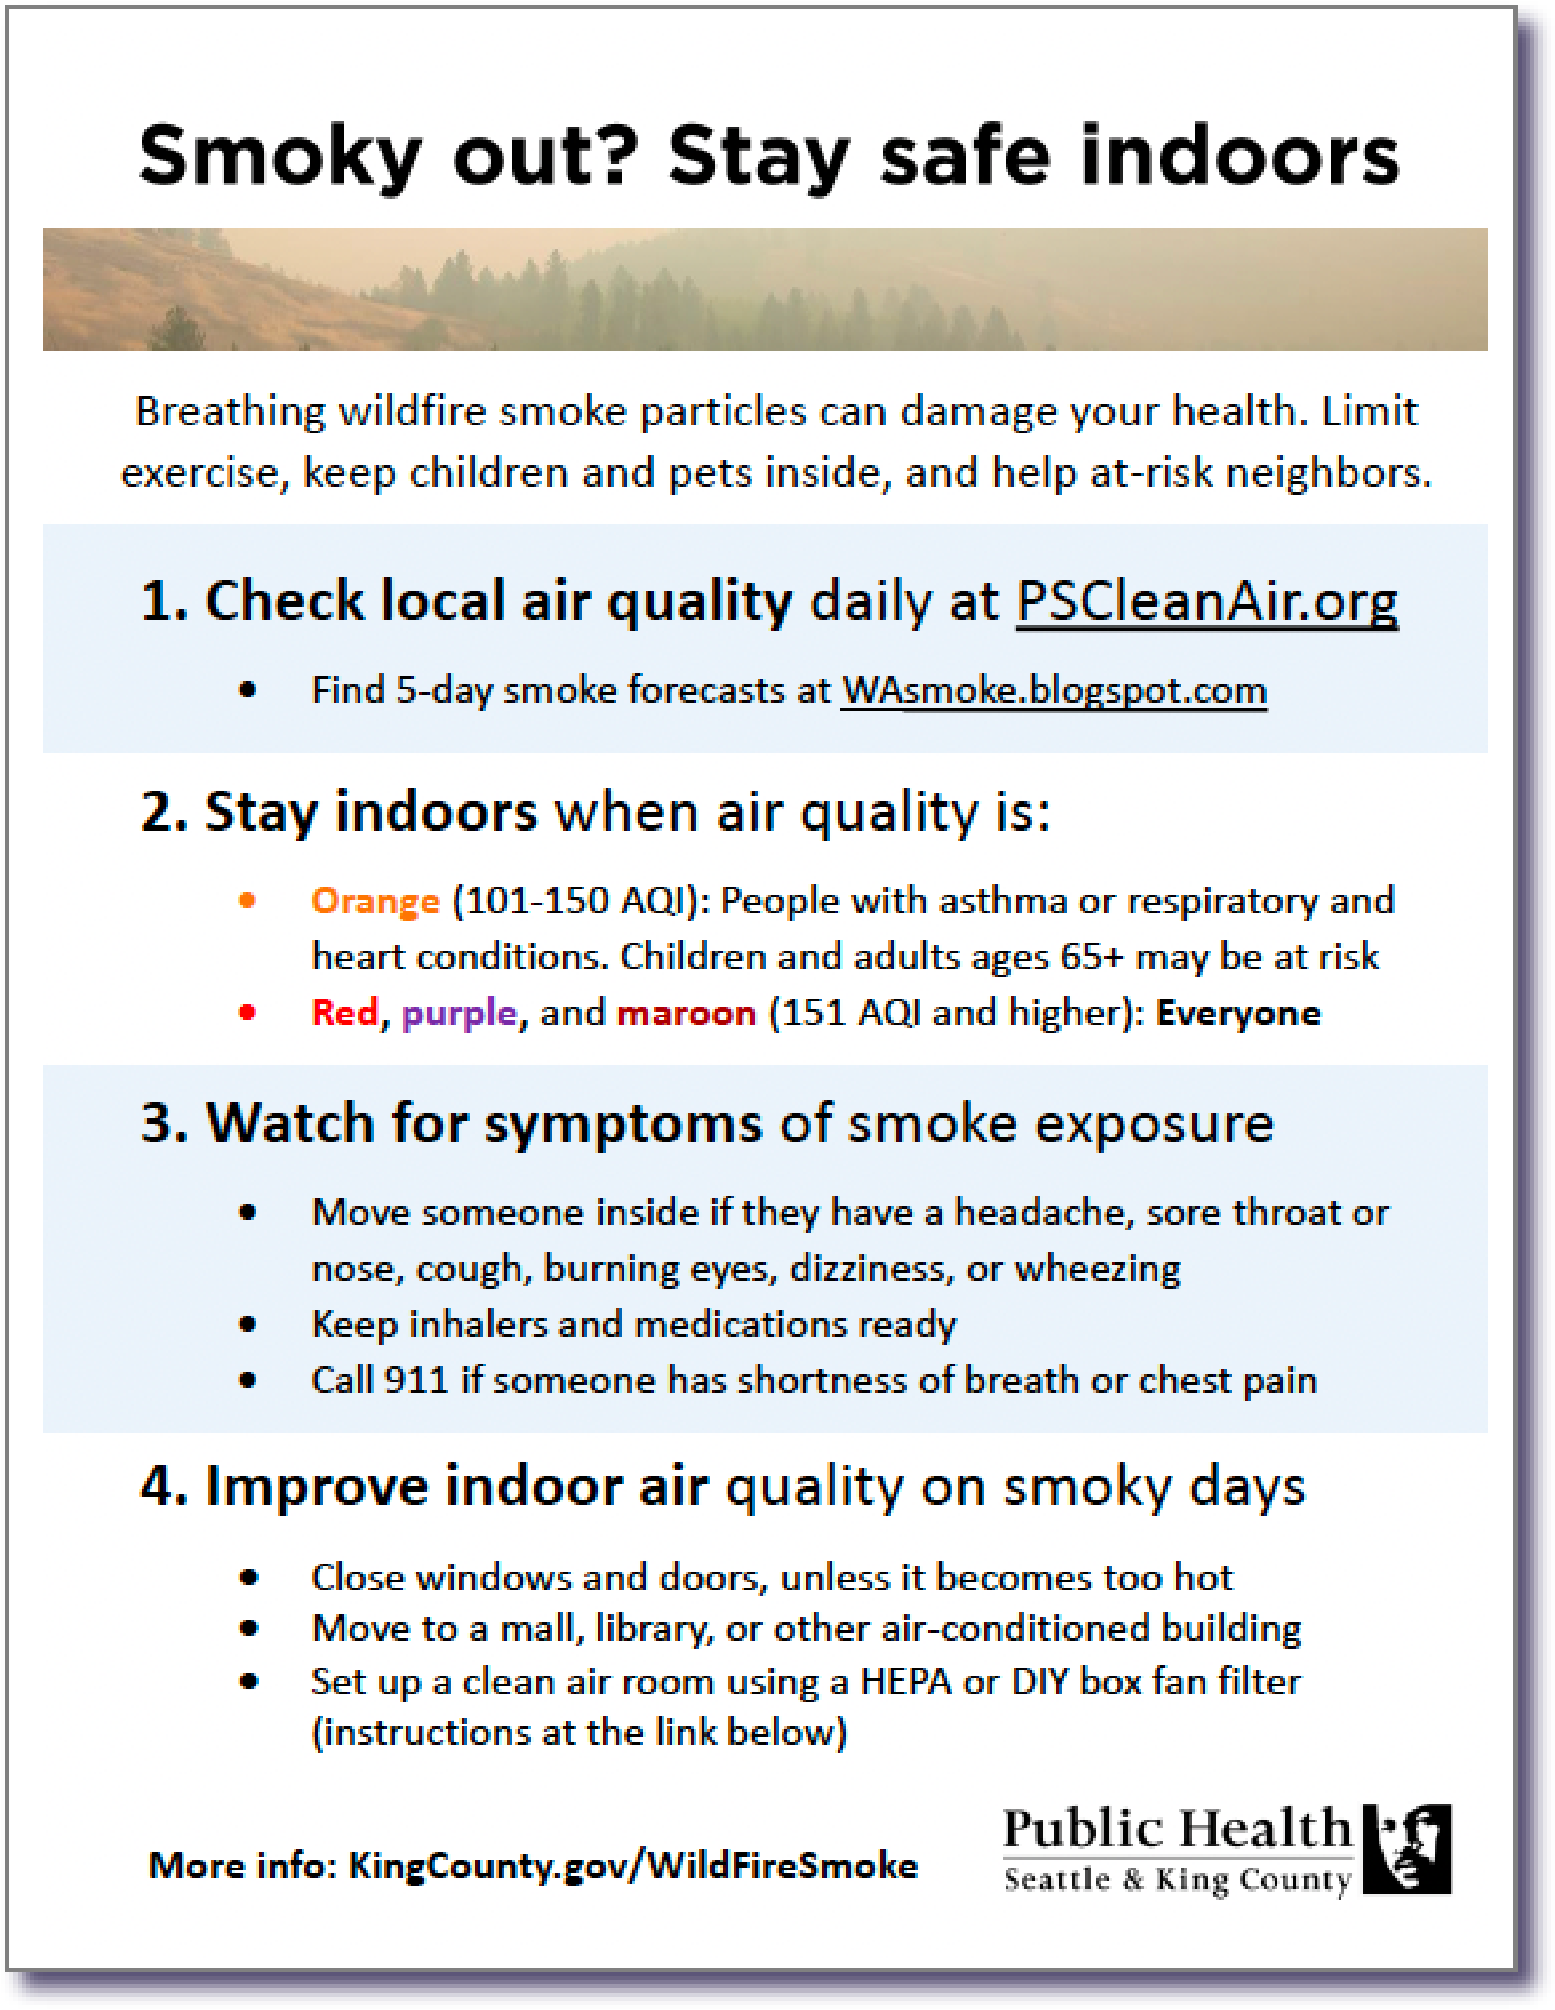 One page flyer: Stay safe from smoke